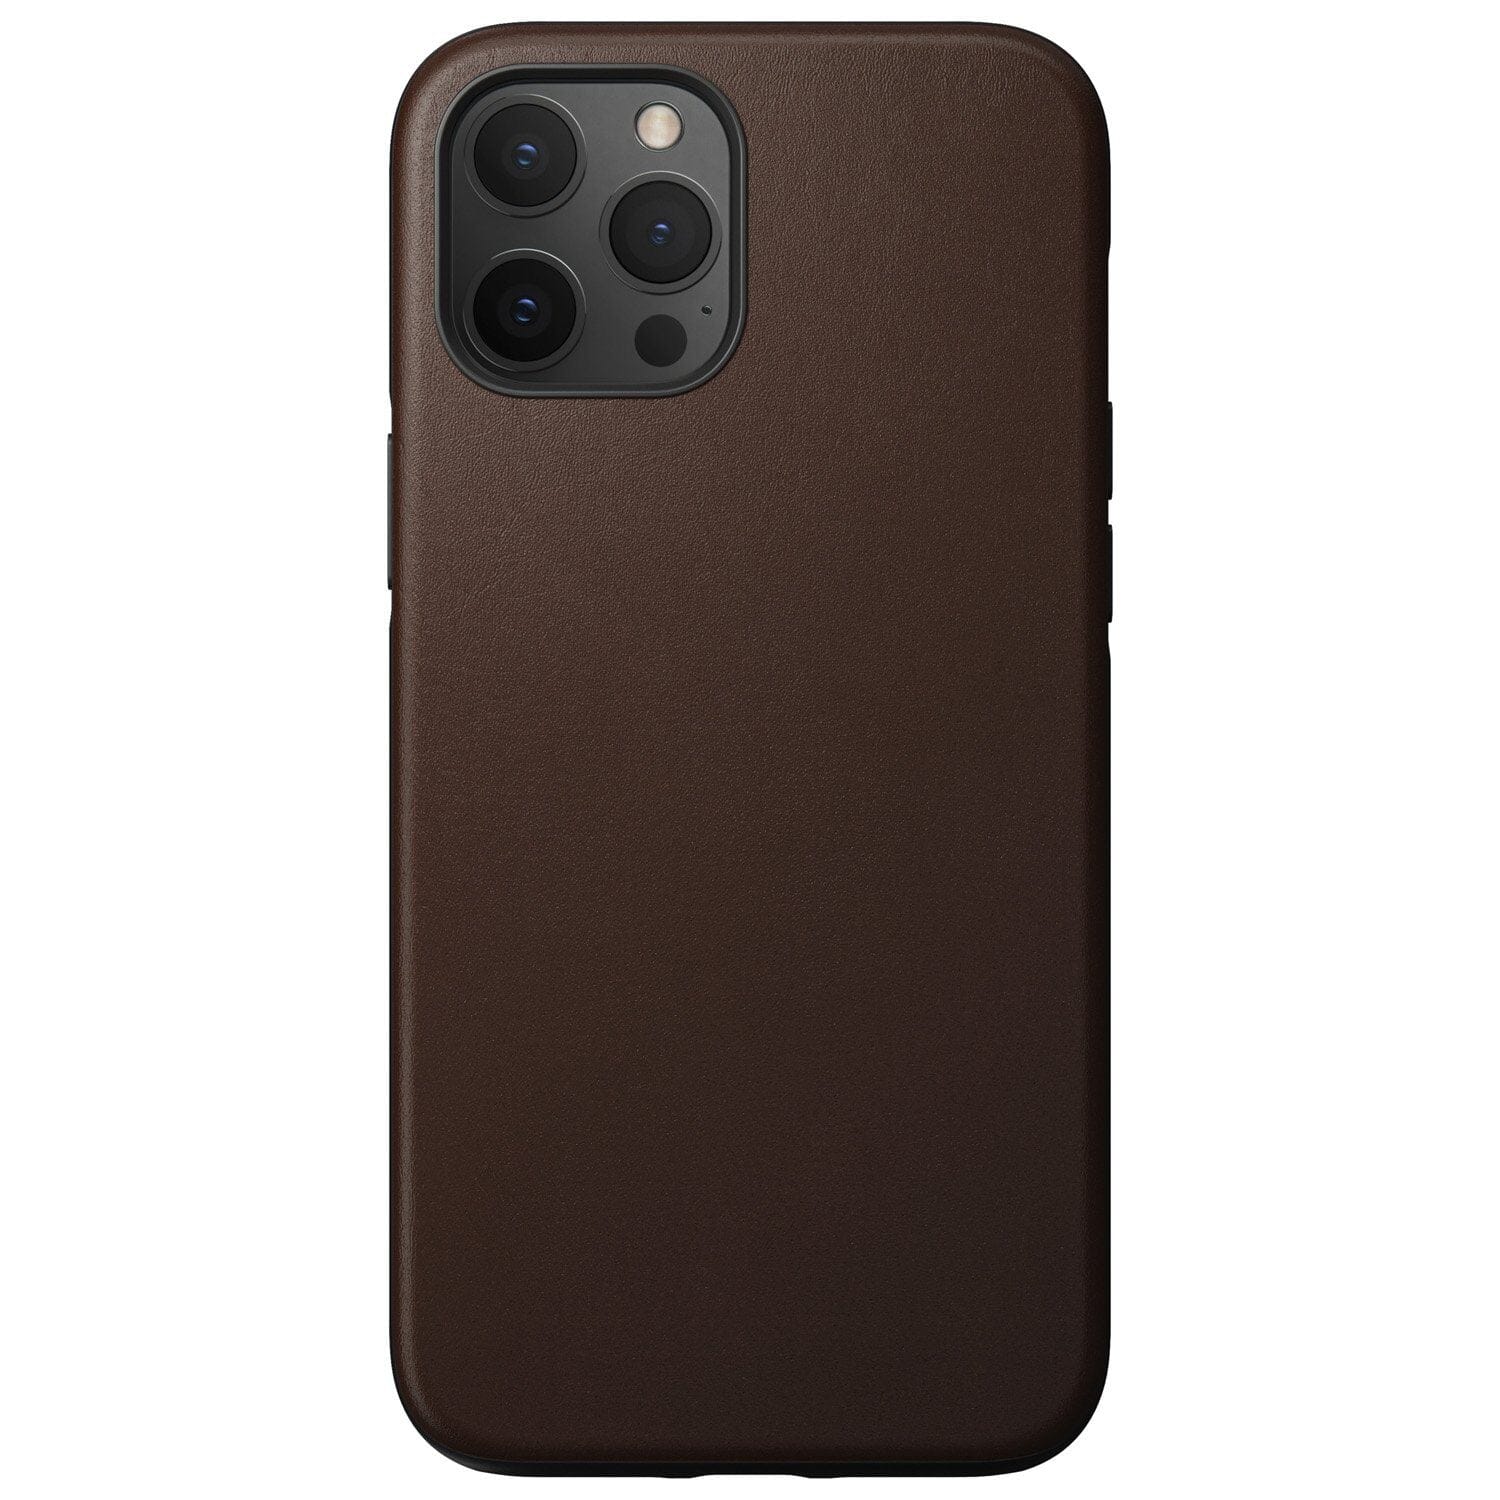 NOMAD Rugged Horween Leather Case for iPhone 12 mini 5.4"(2020), iPhone 12 Series NOMAD Rustic Brown iPhone 12 Pro Max 6.7" 